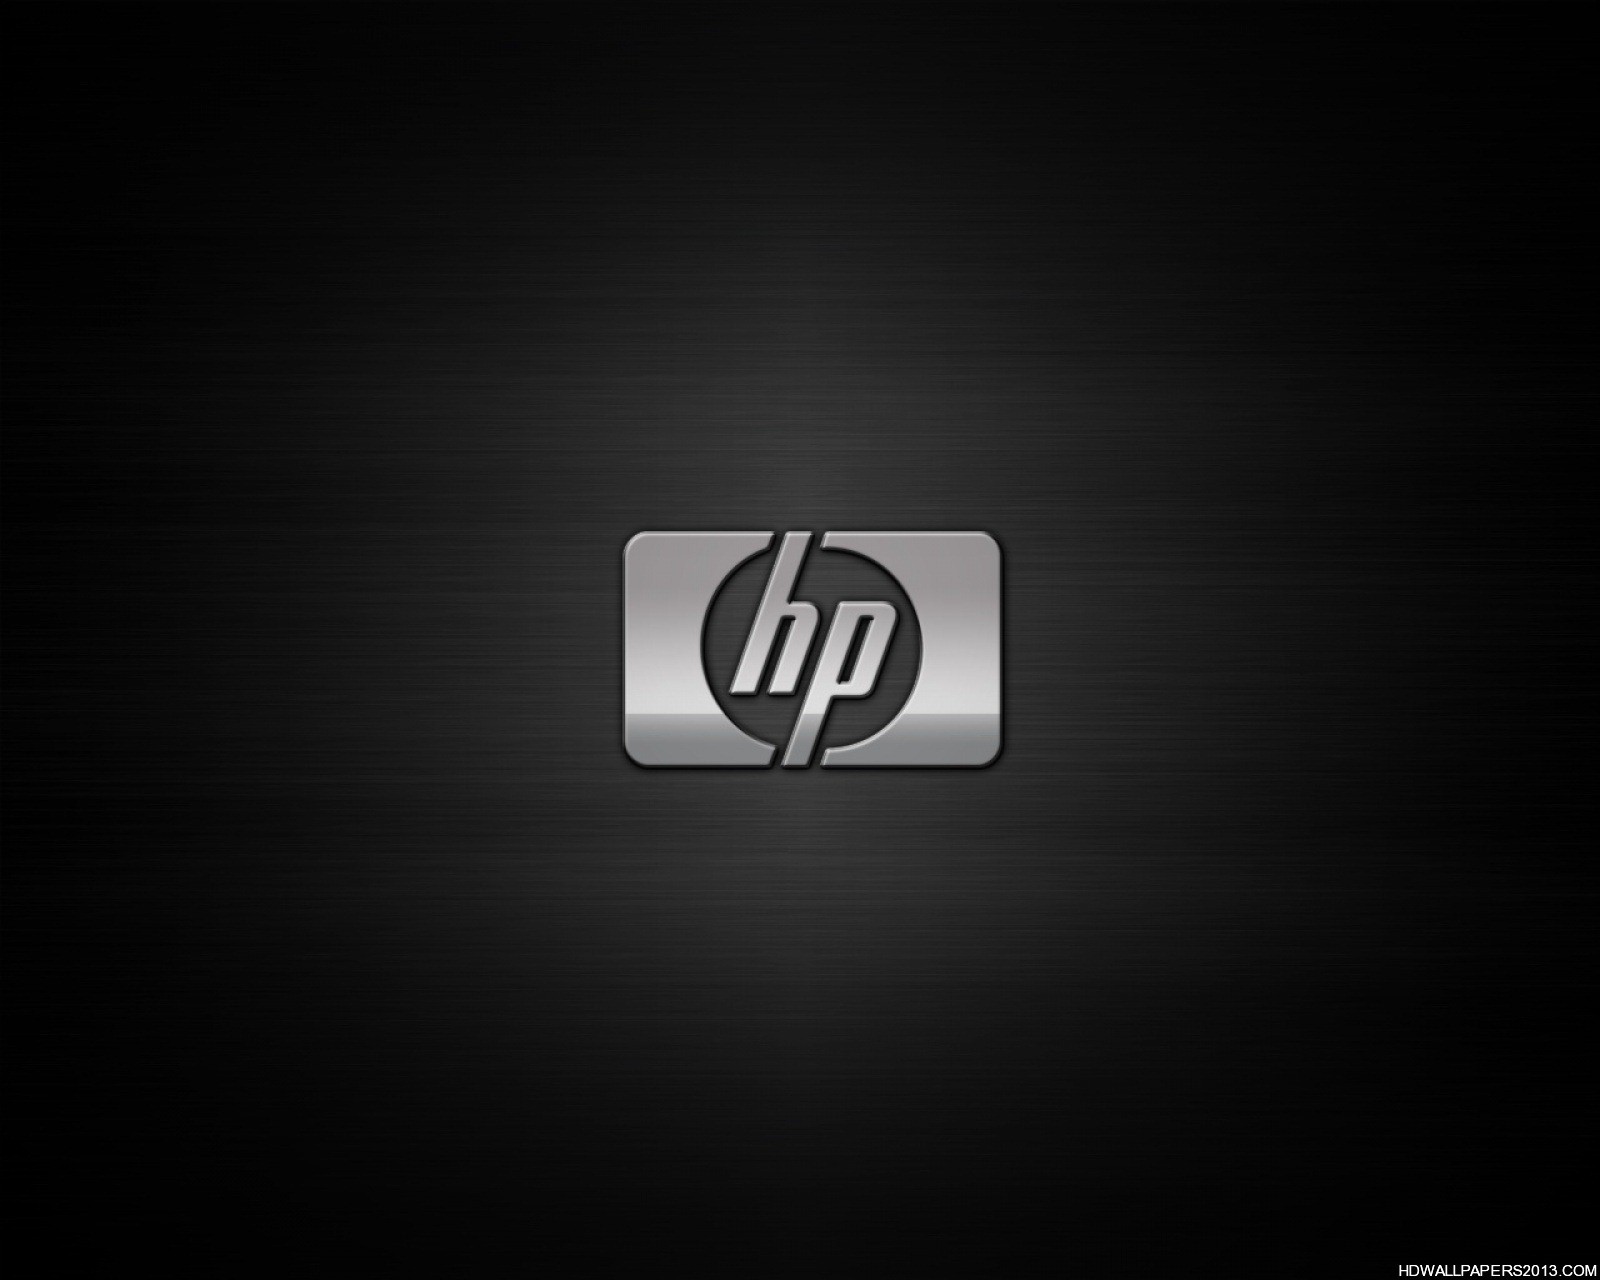 HP Wallpaper High Definition Wallpapers High Definition